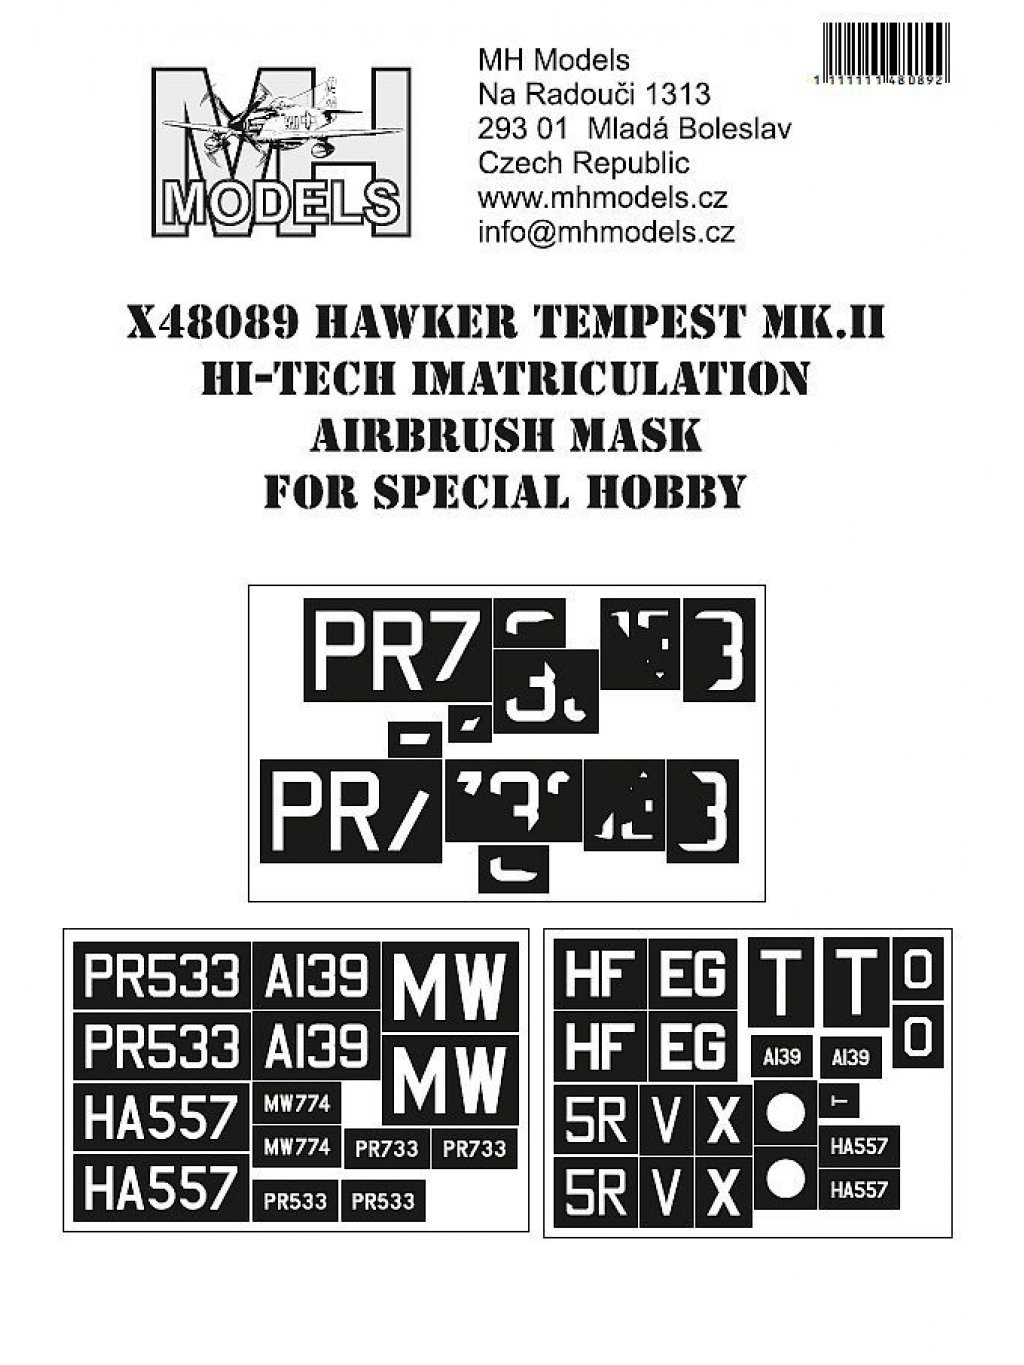 Hawker Tempest Mk.II Hi-Tech imatriculation airbrush mask for Special Hobby